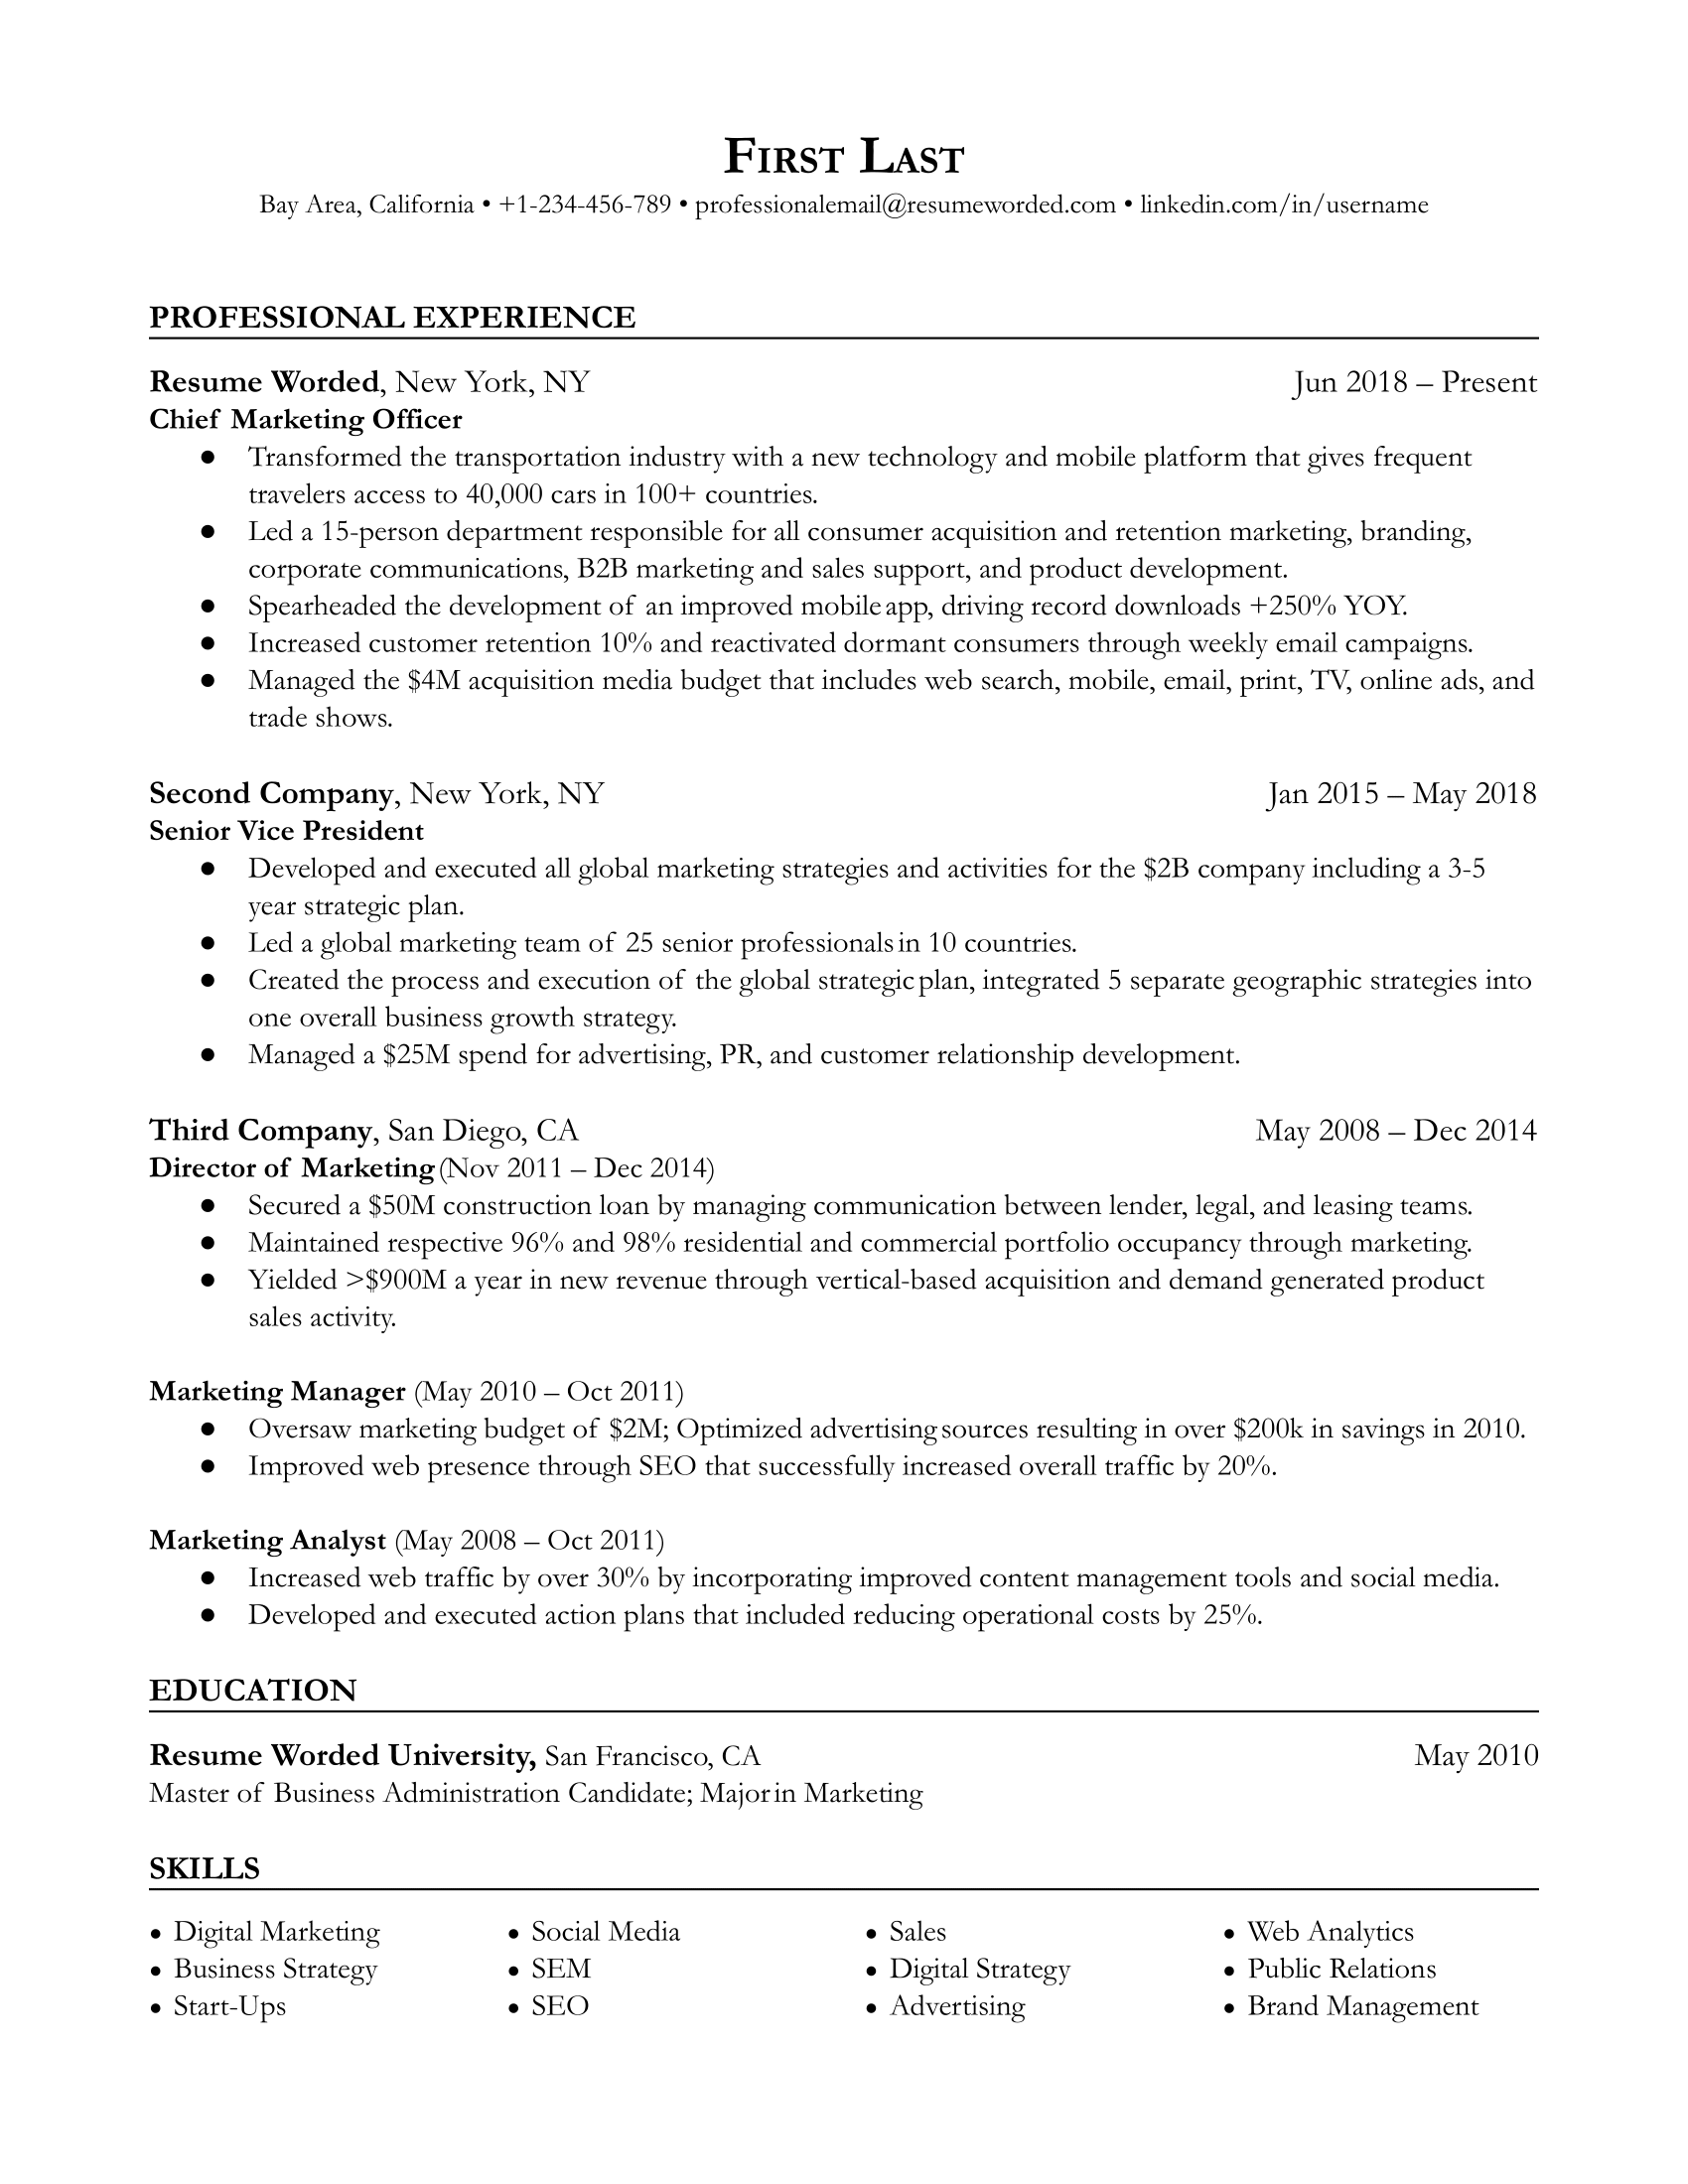 Chief Marketing Officer resume template example focused on marketing and emphasizing internal promotions